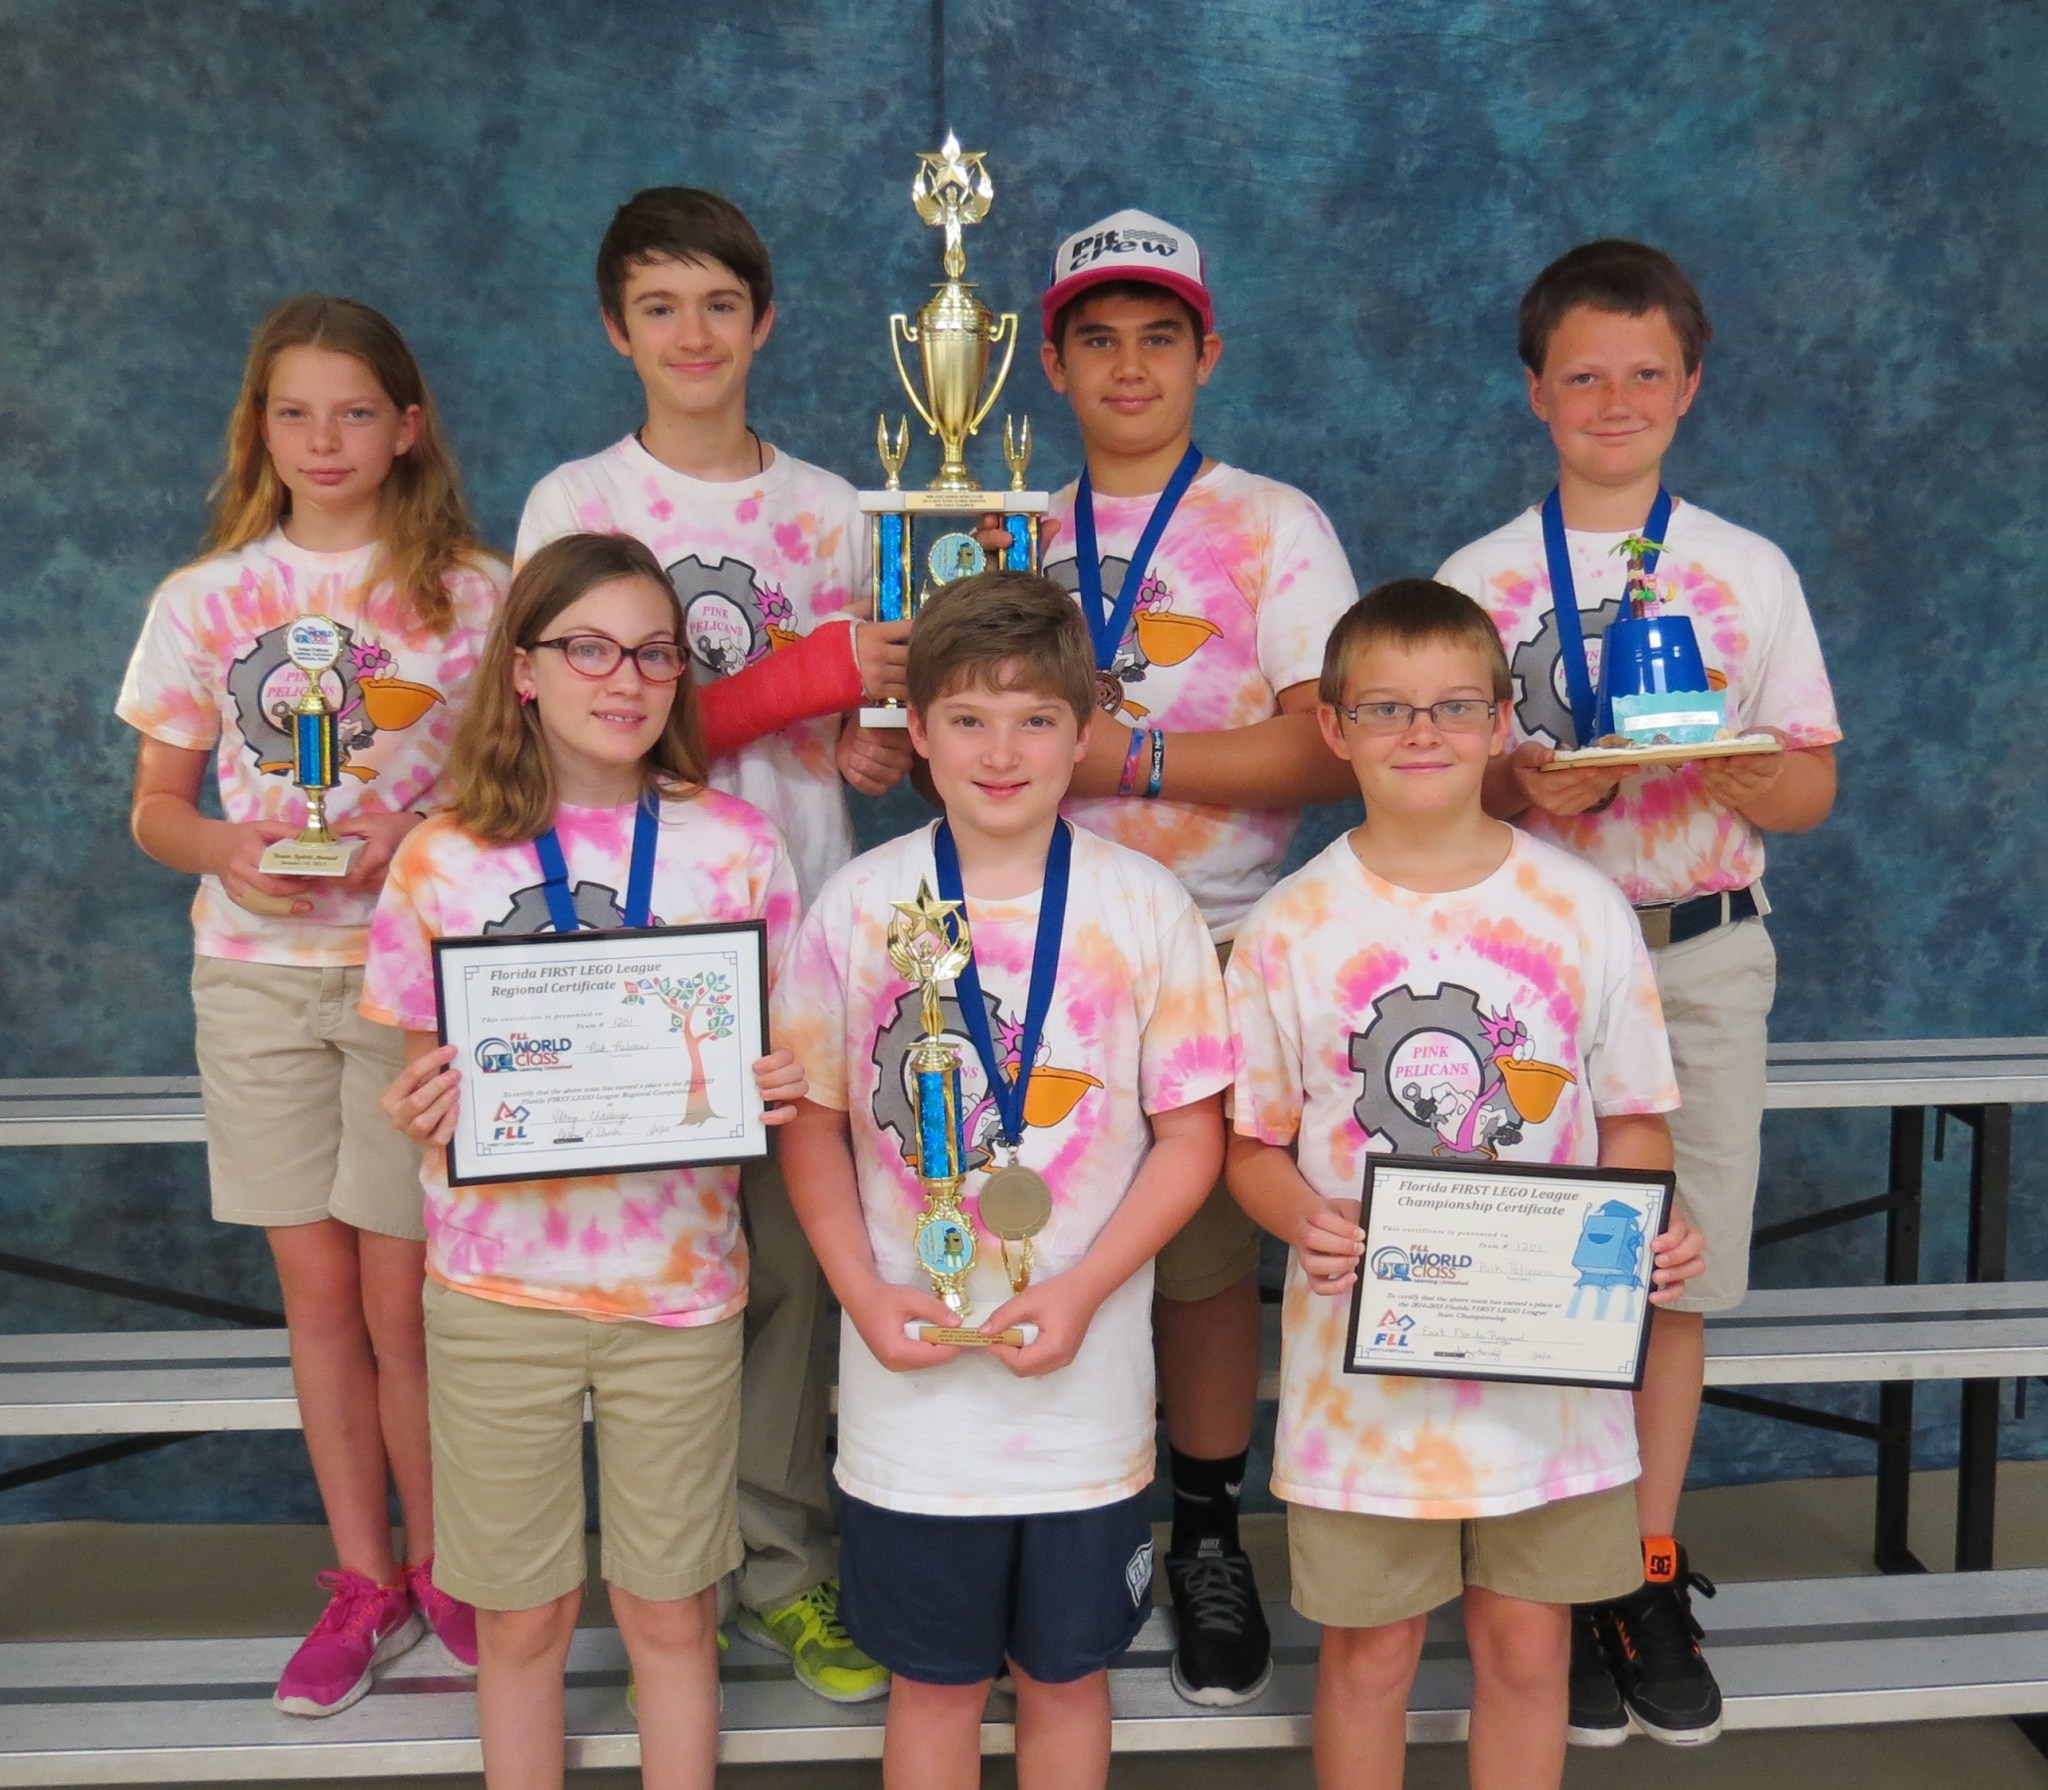 A group of students from the Florida FIRST Lego League Championship pose for a photo.